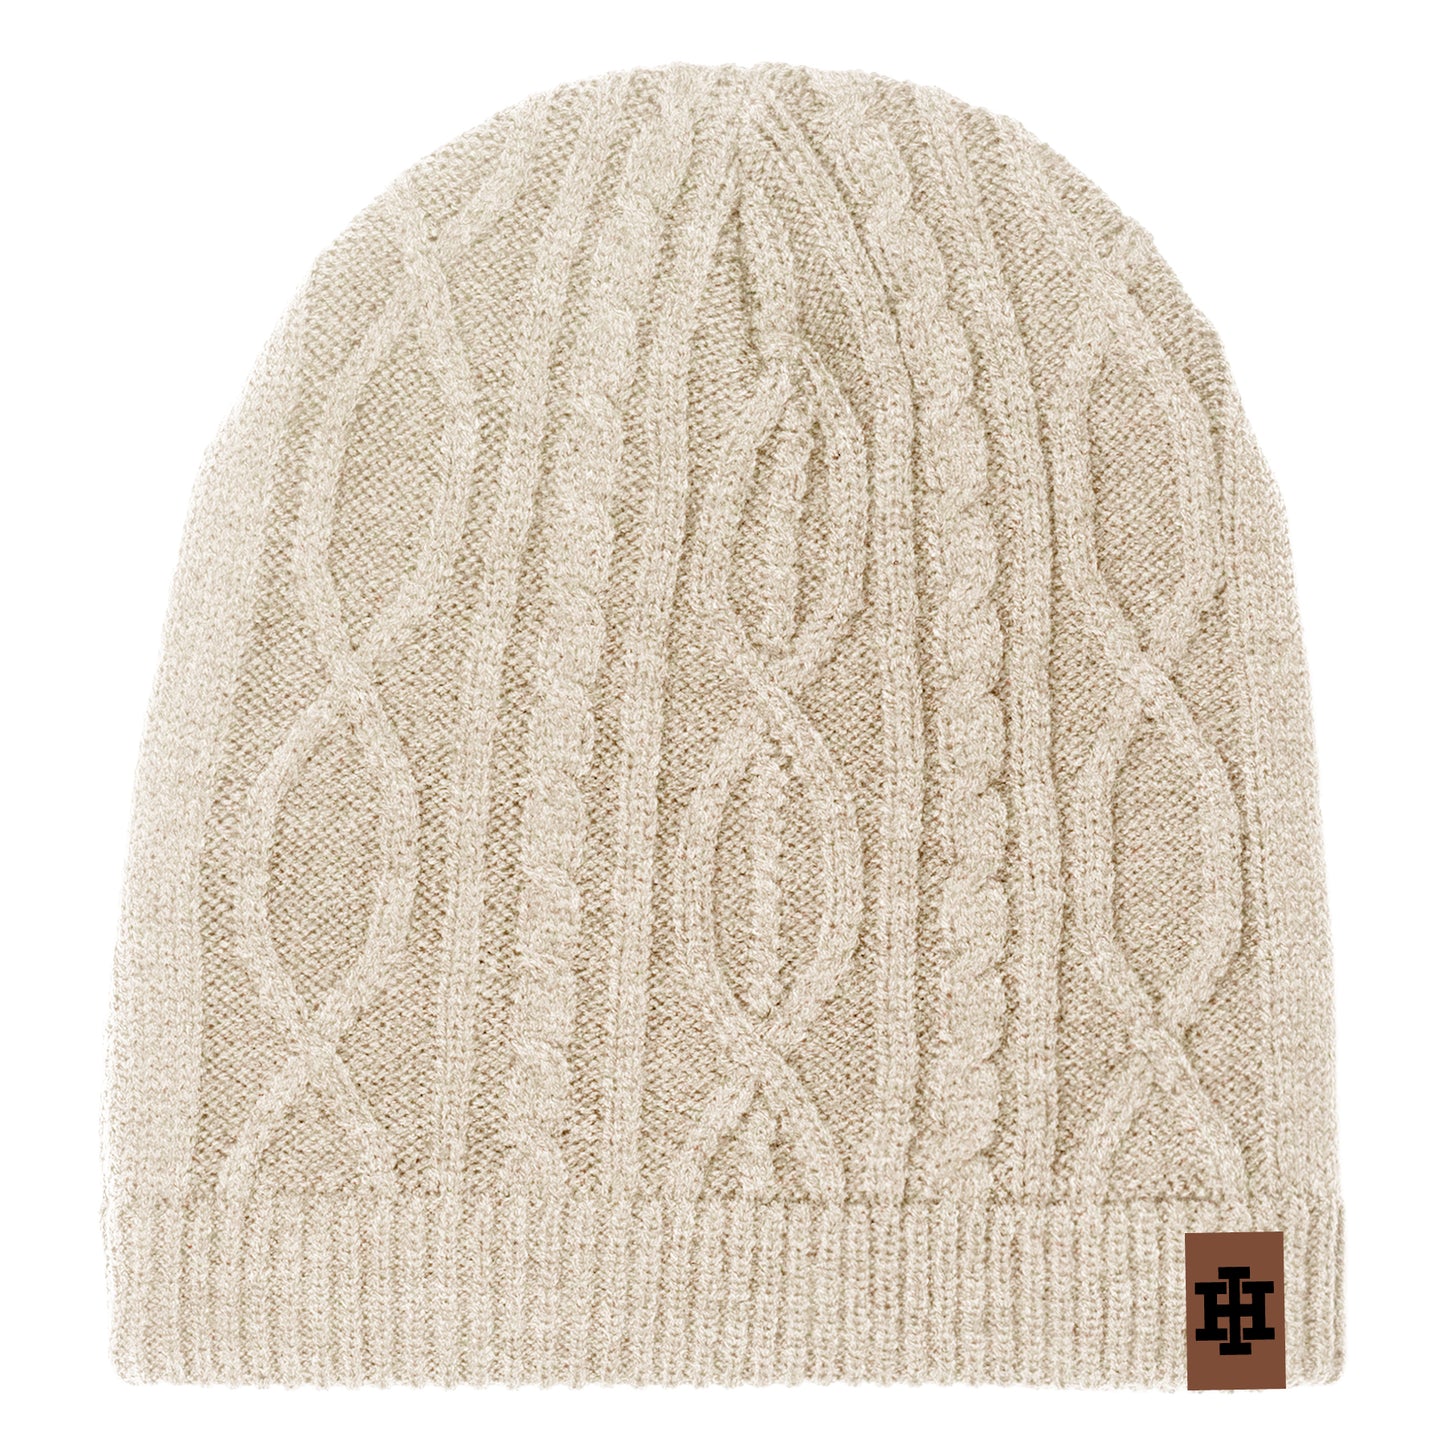 Ouray Cableknit Slouch Beanie - Ivory